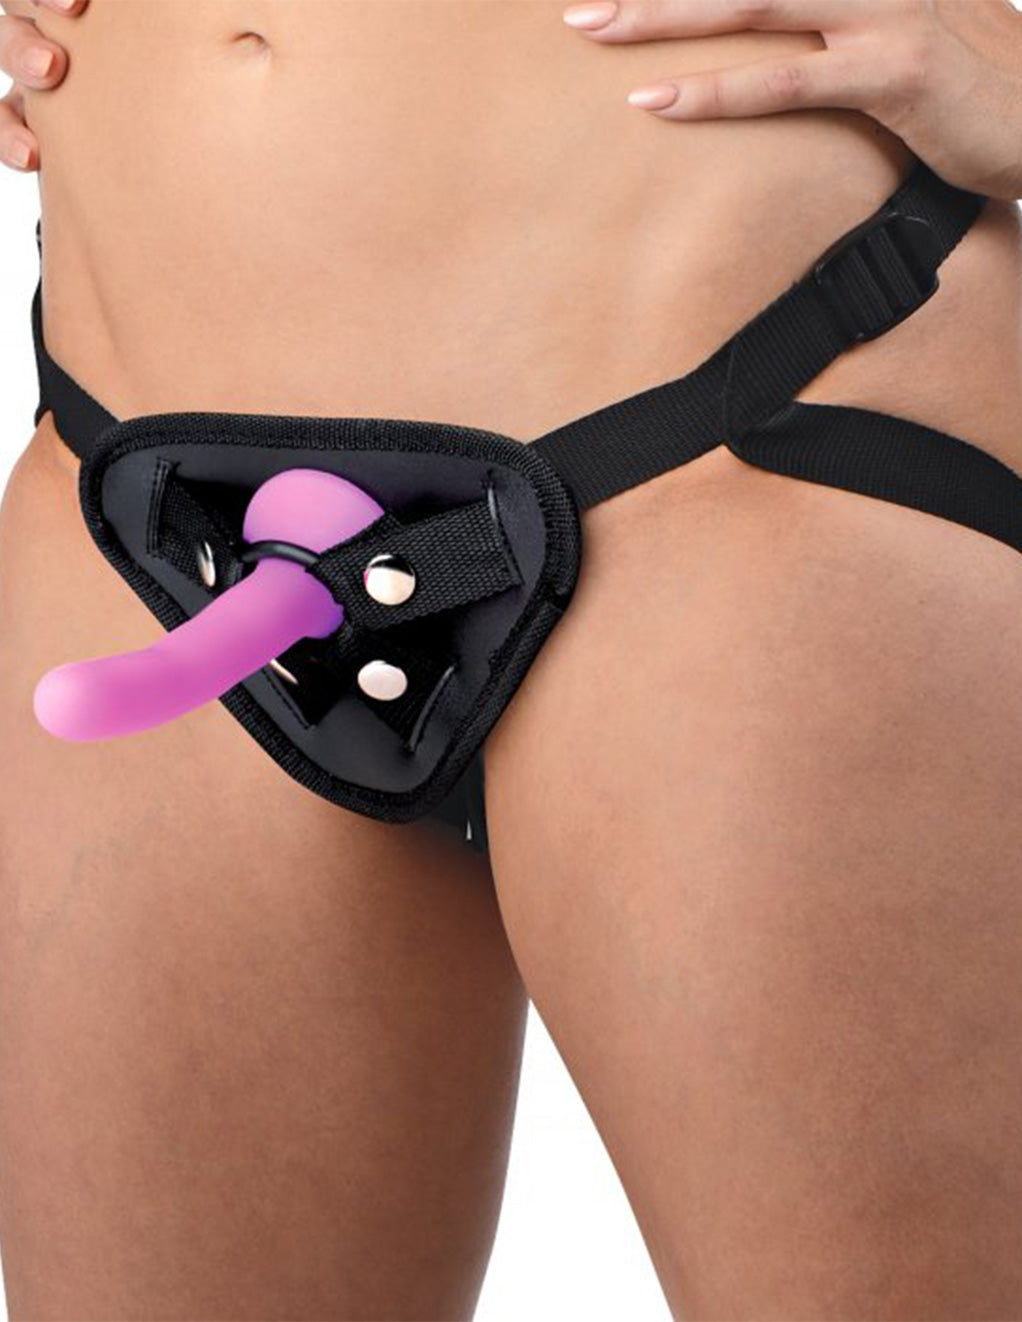 Strap U Double G Deluxe Vibrating Strap-on Kit